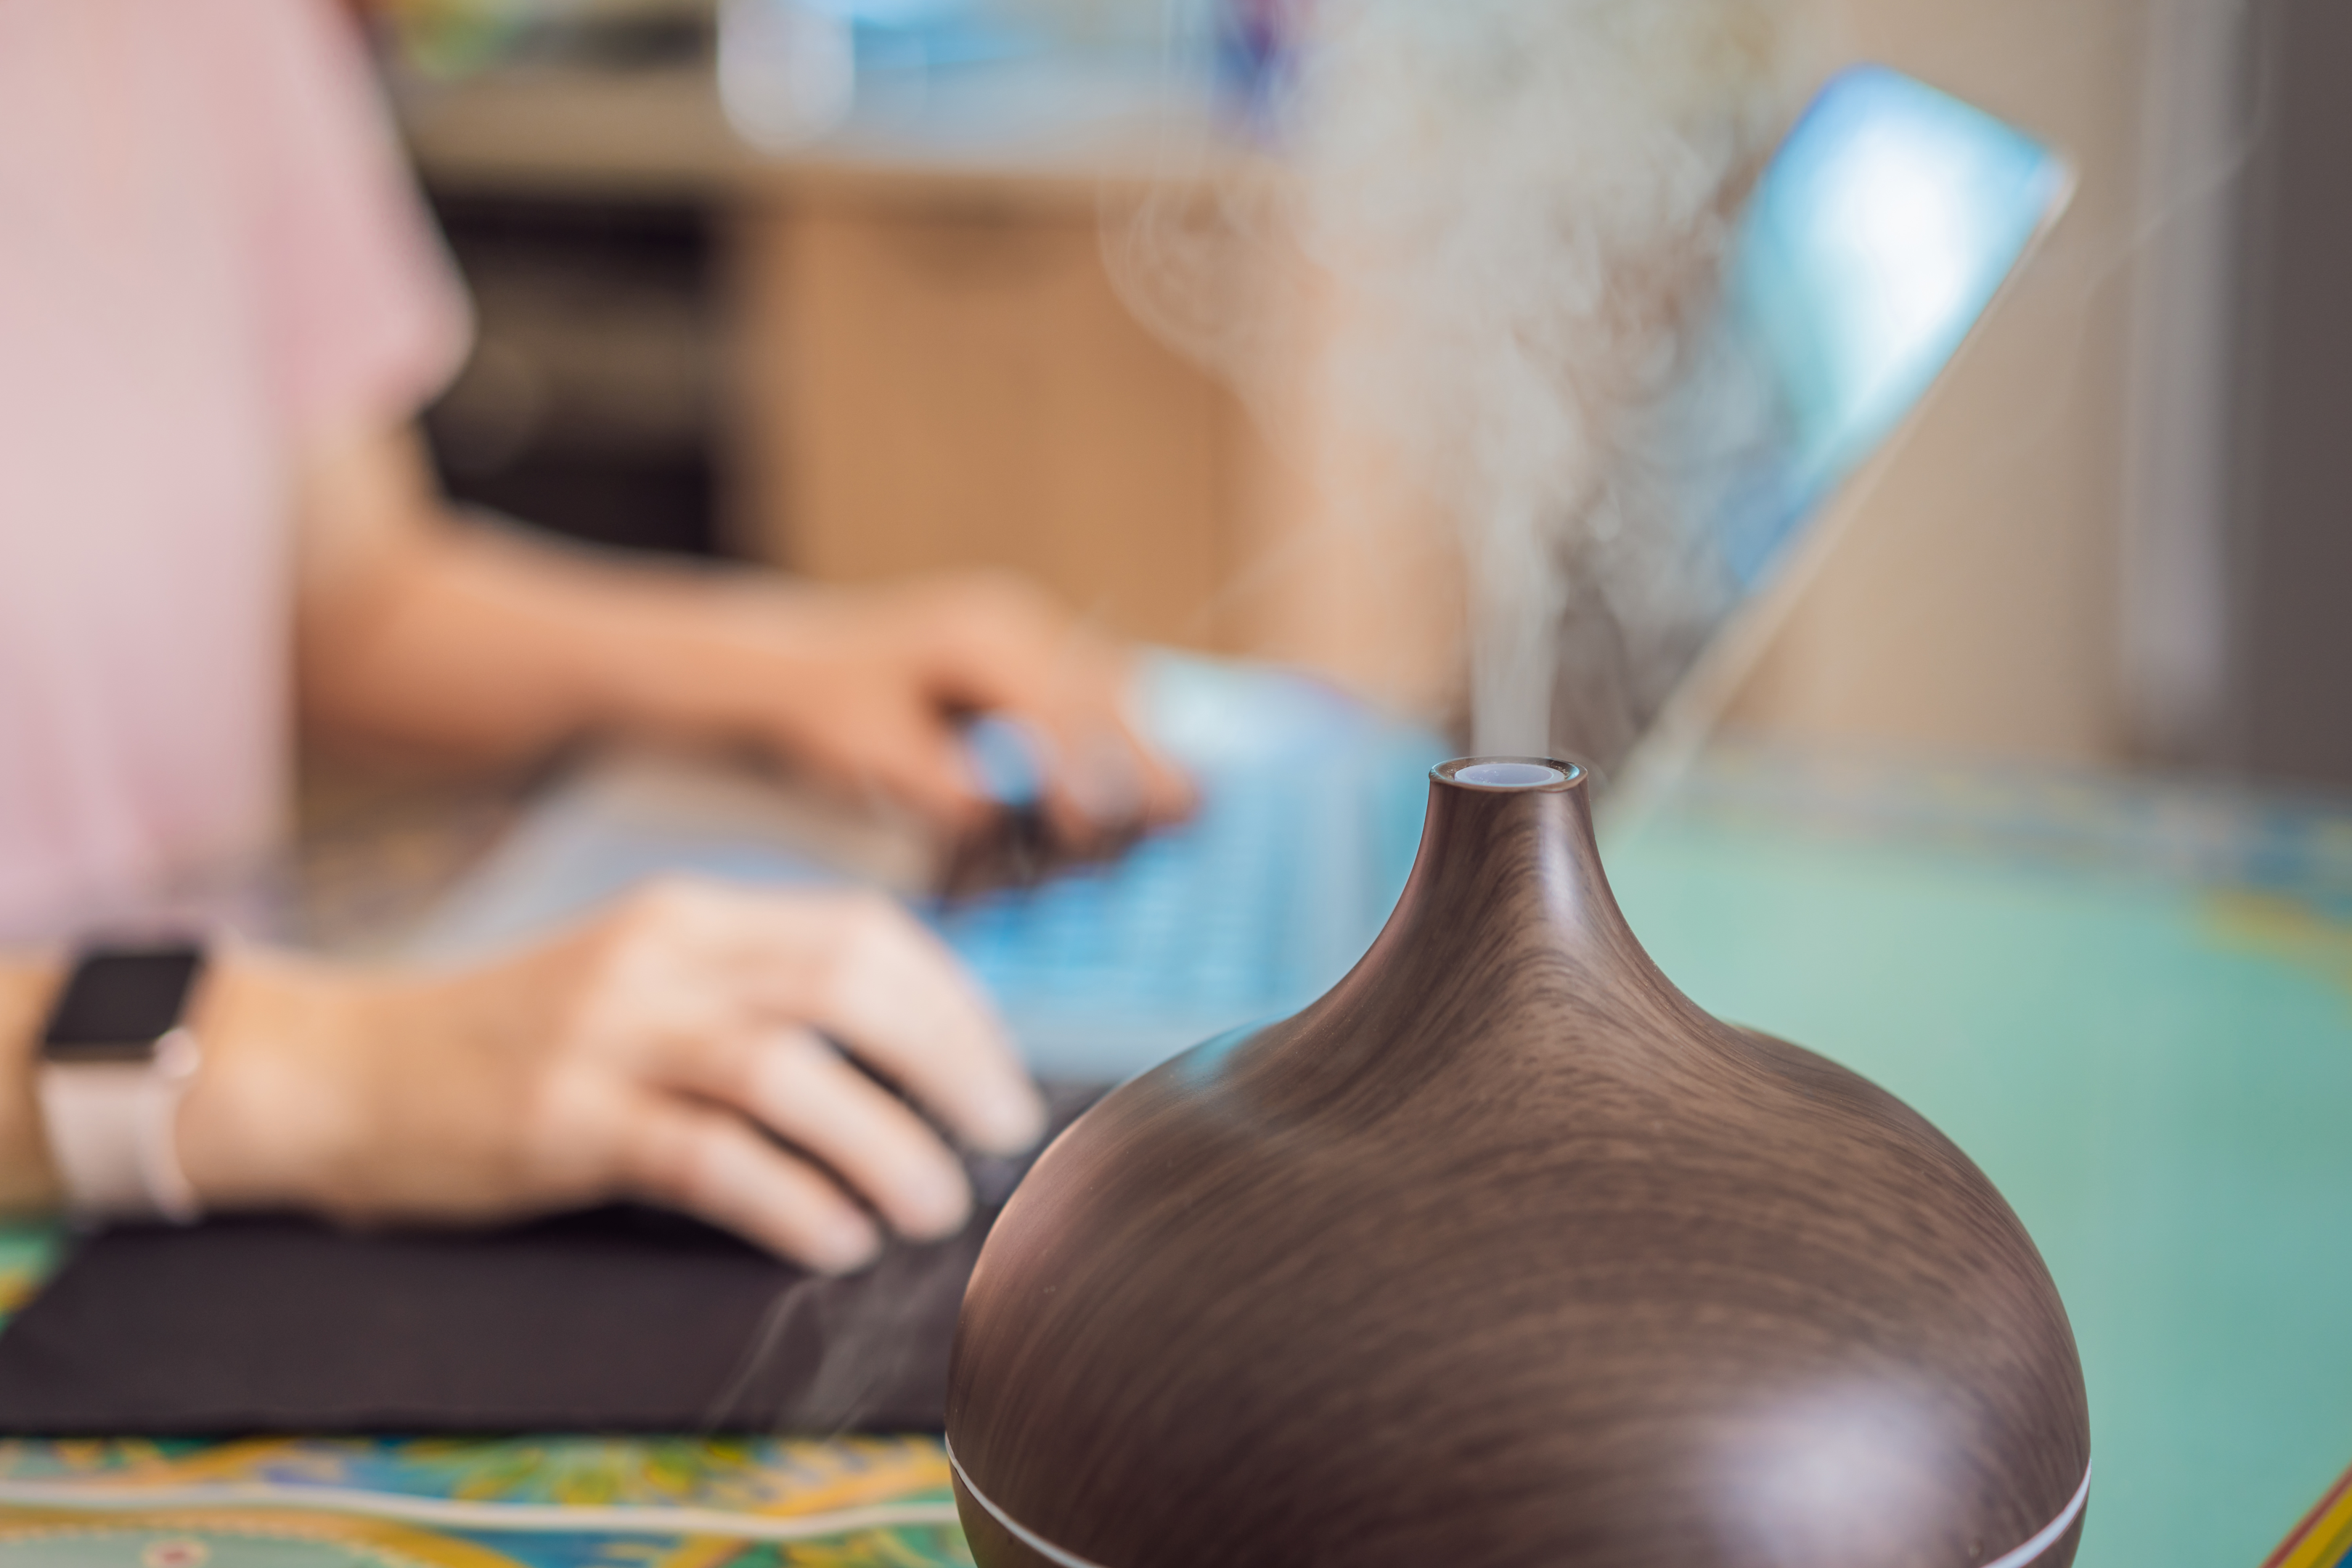 Also use the aroma diffuser for more concentration with Peppermint oil or Eucalyptus oil while working